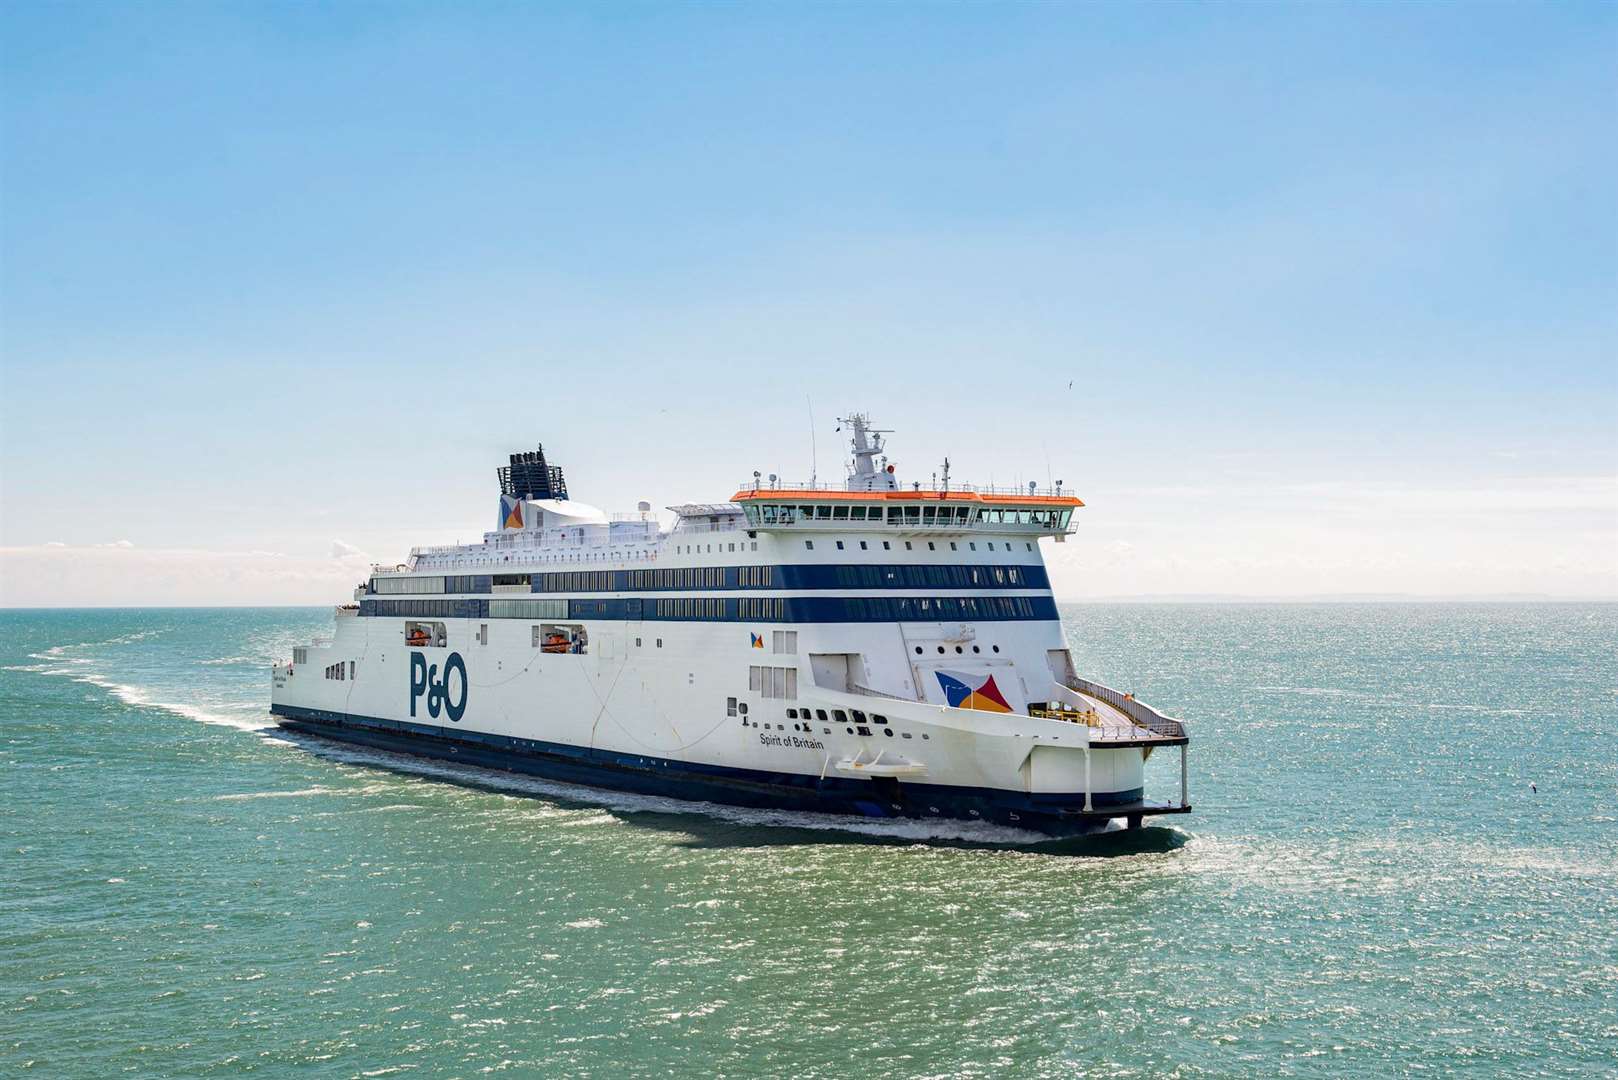 P&O have warned that services will be disrupted by strike action